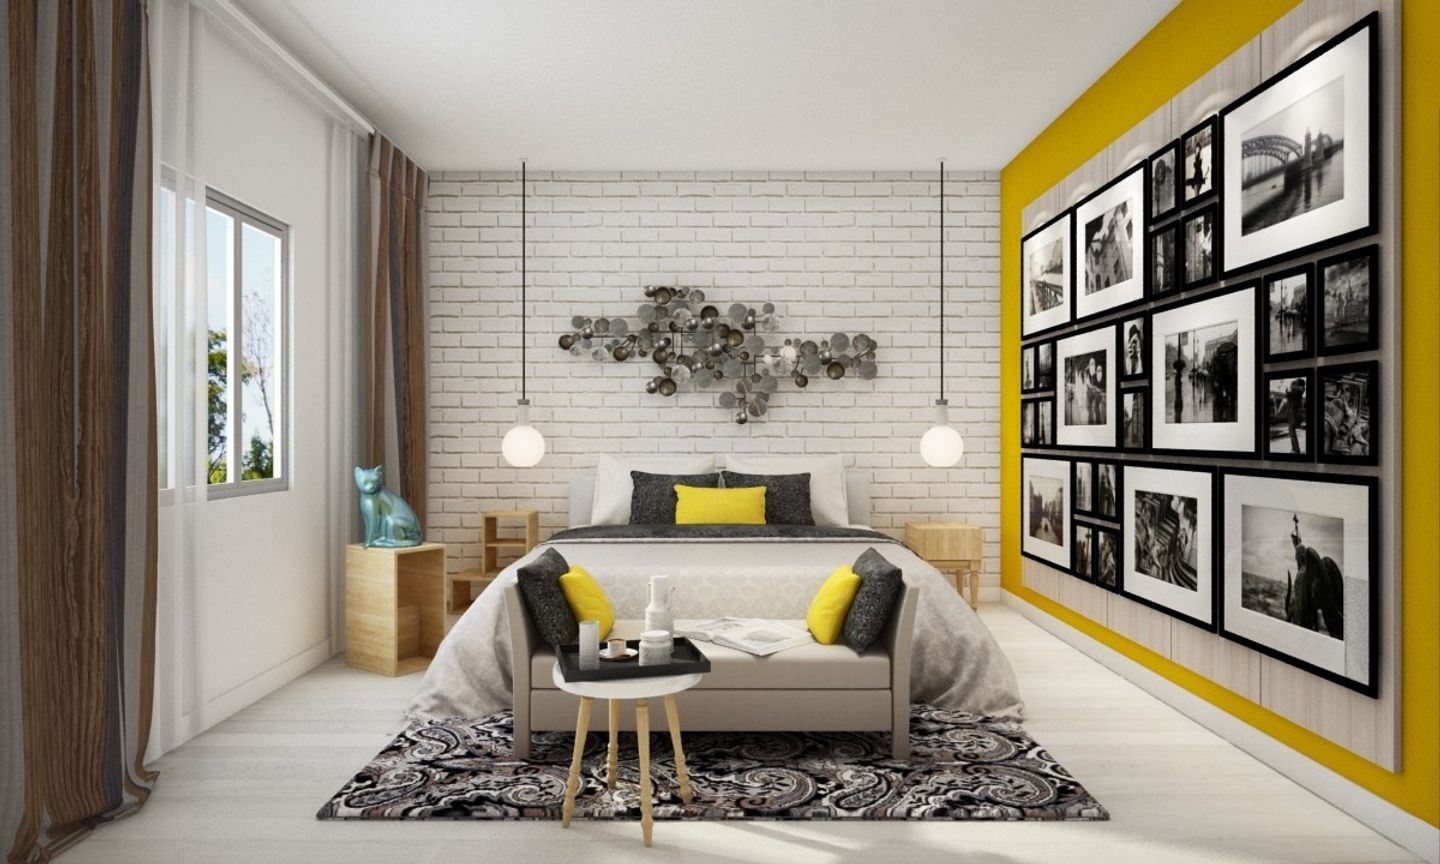 Contemporary Bedroom Design With Grey And Yelow Interiors